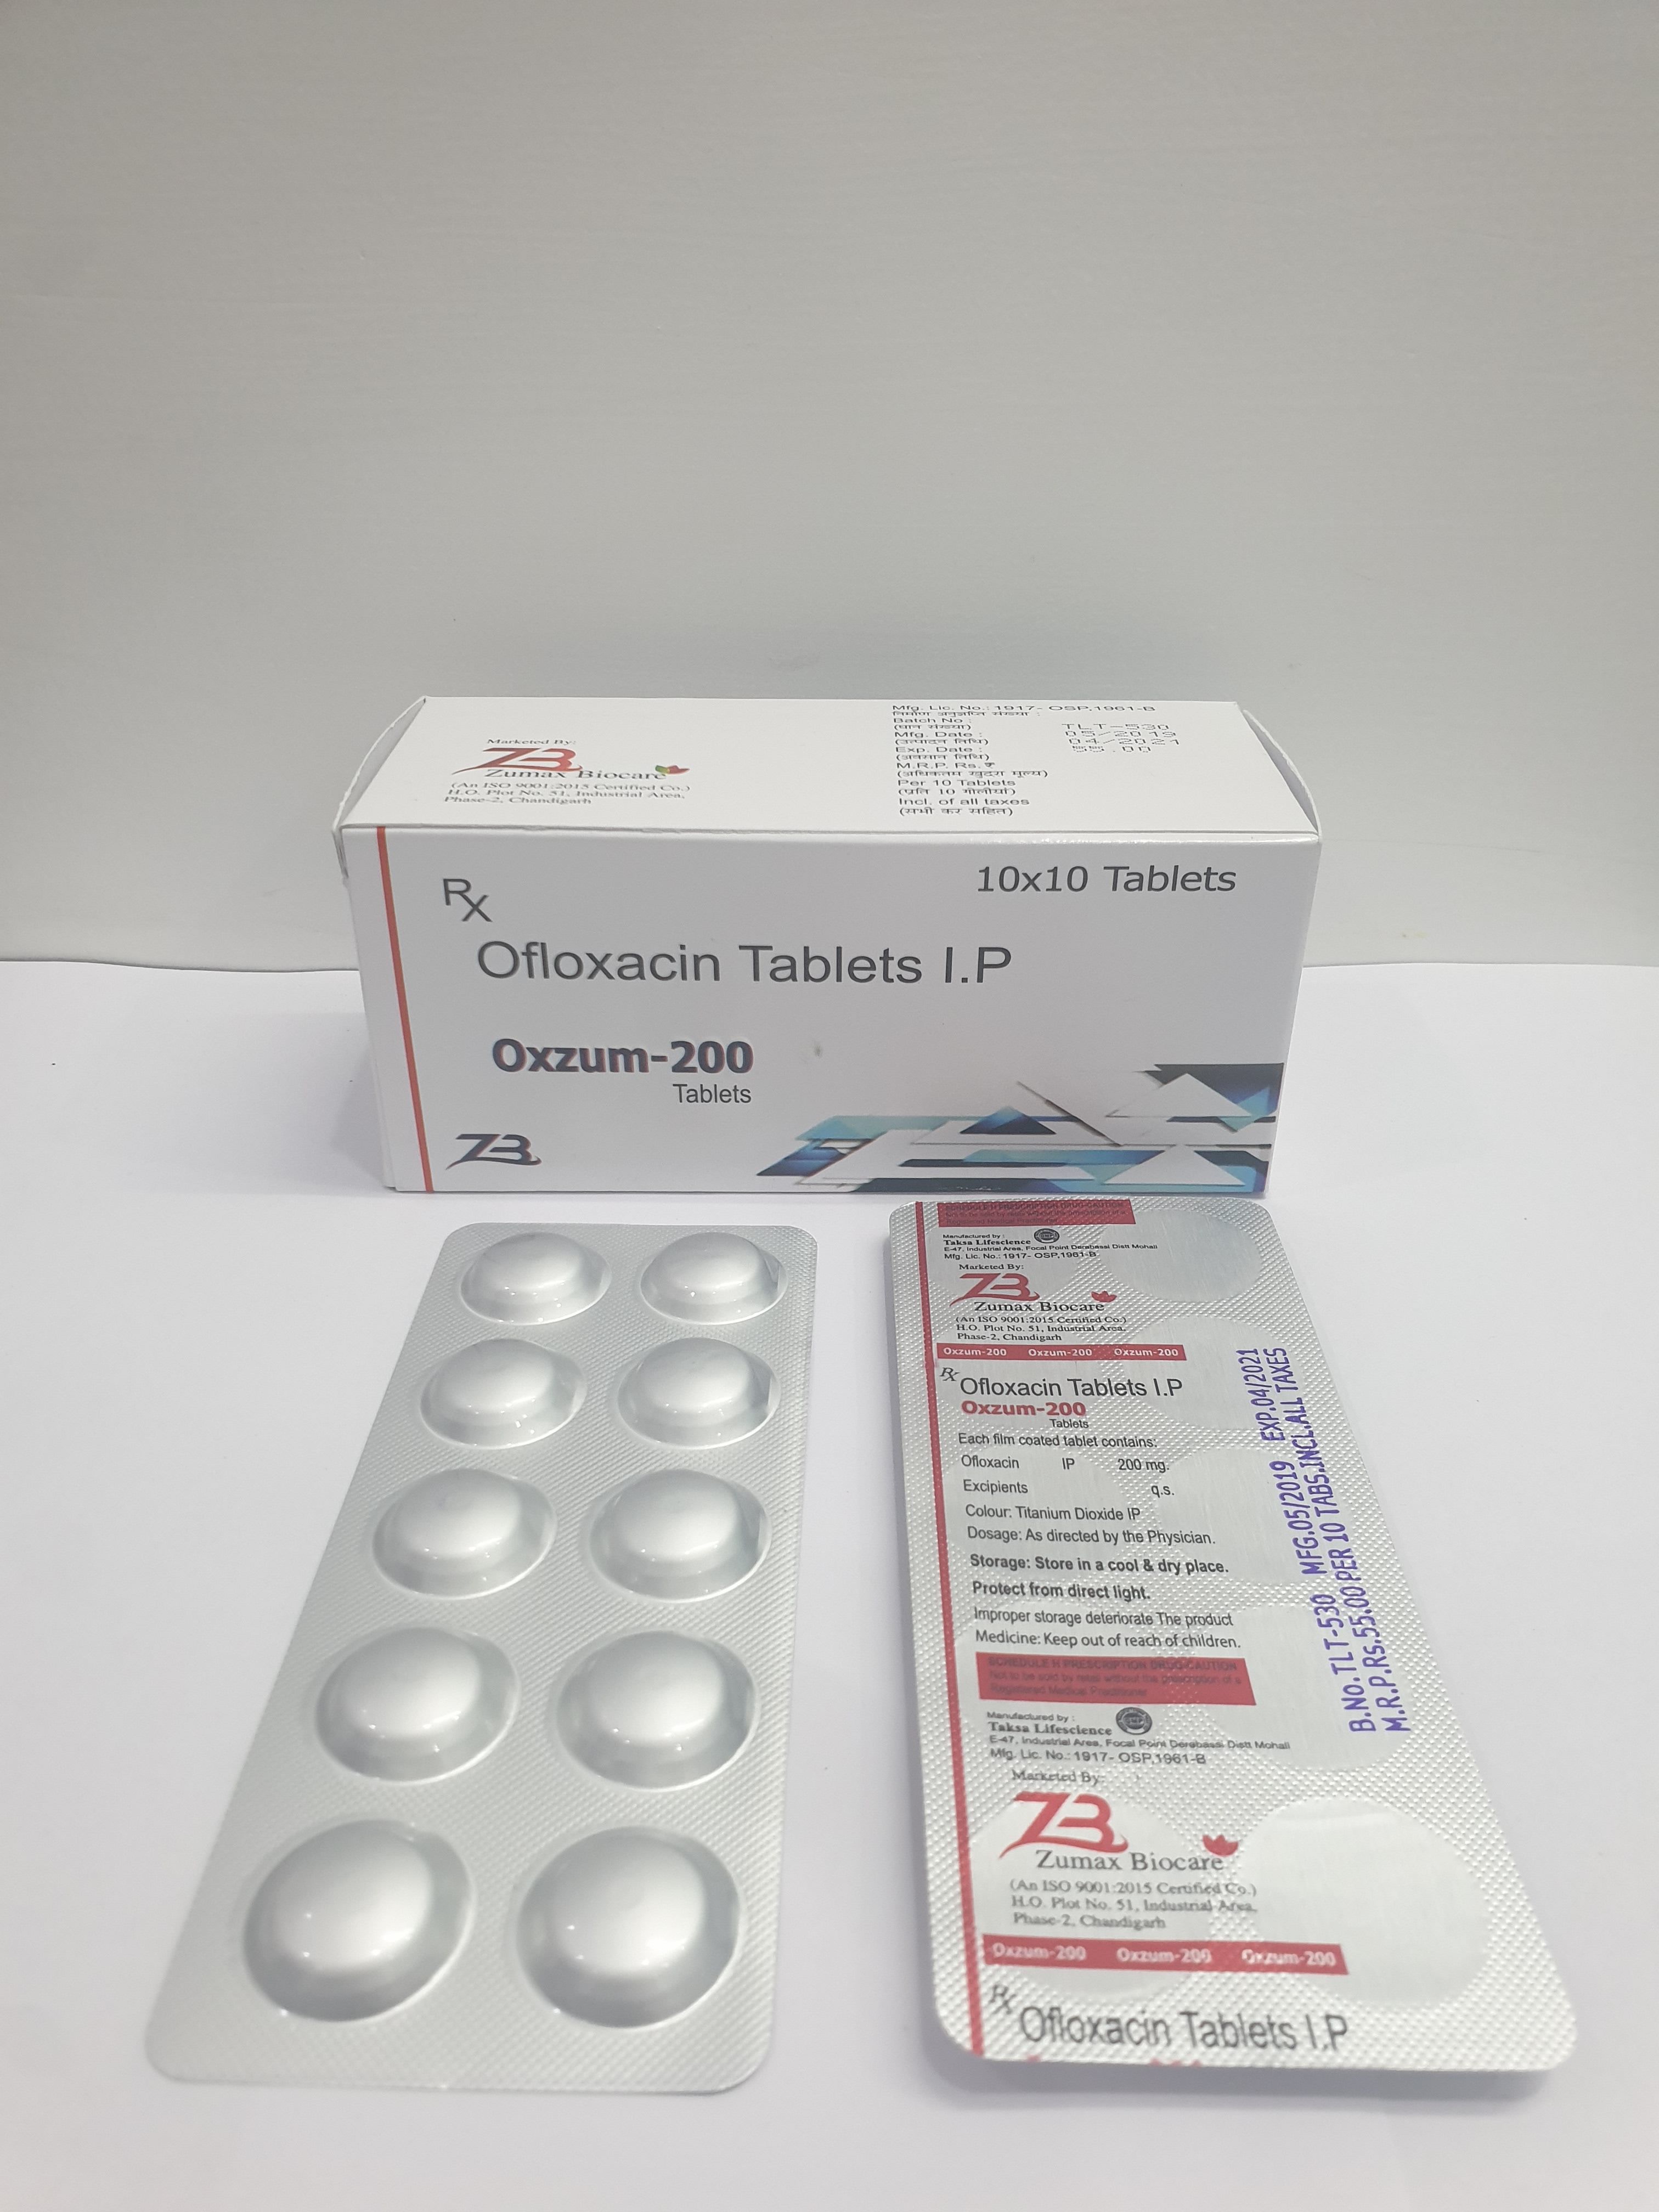 Product Name: Oxzum 200, Compositions of Oxzum 200 are Ofloxacin Tablets IP - Zumax Biocare